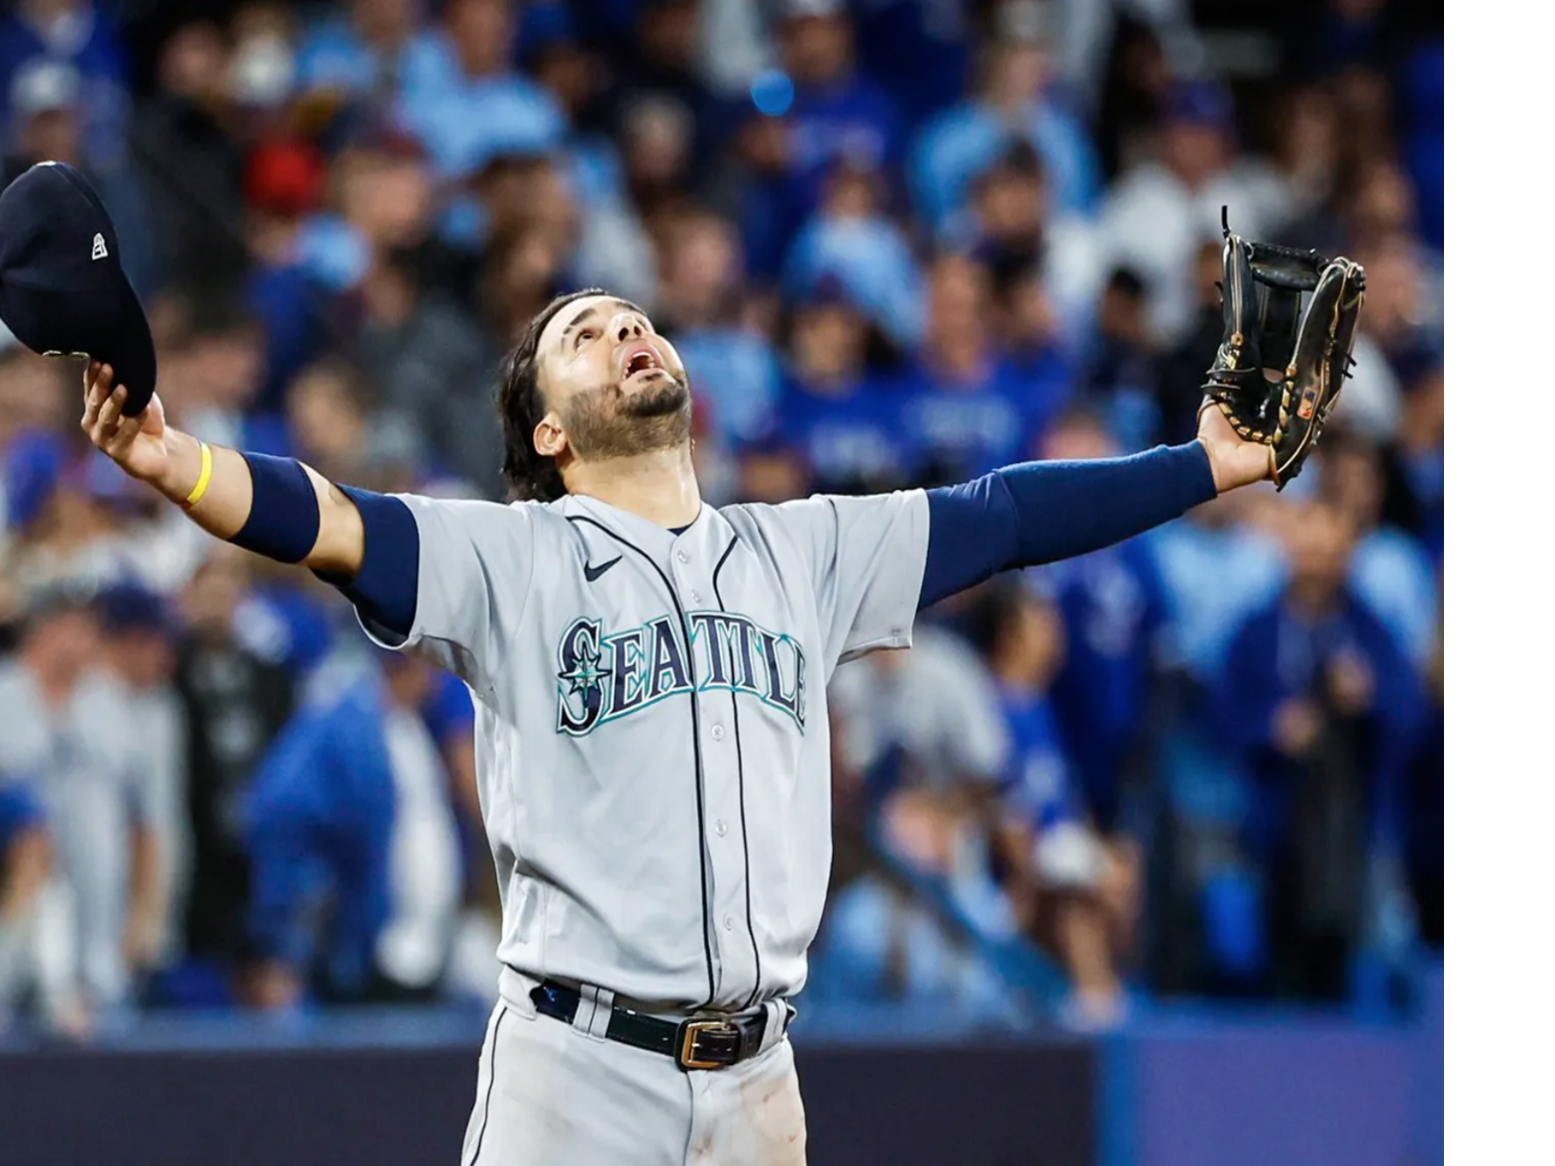 Mariners complete wild comeback, beat Blue Jays to advance to ALDS, Mariners